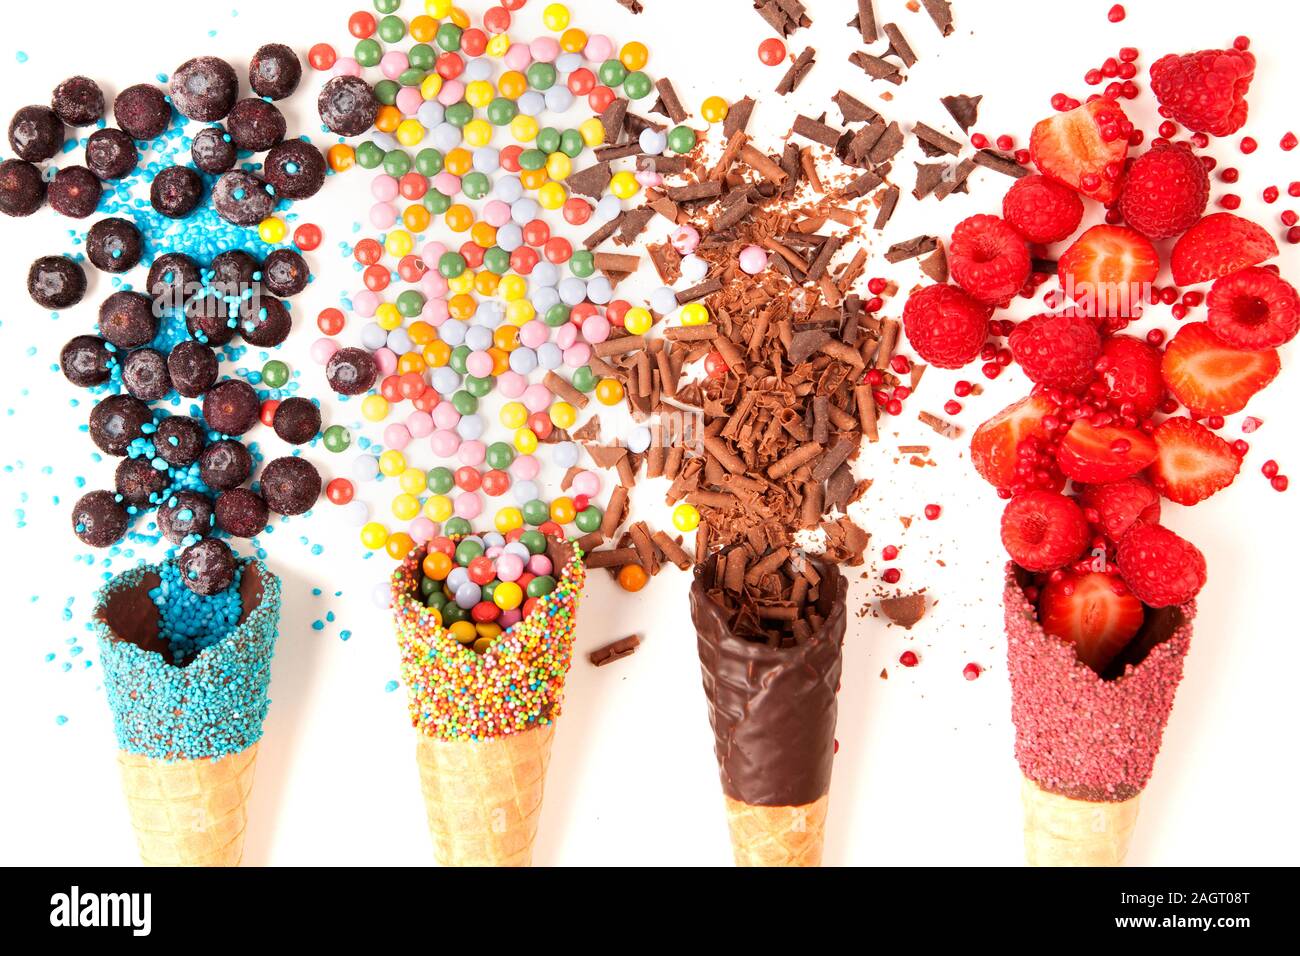 Ice cream cones with colourful toppings and fruit on white flat lay Stock Photo